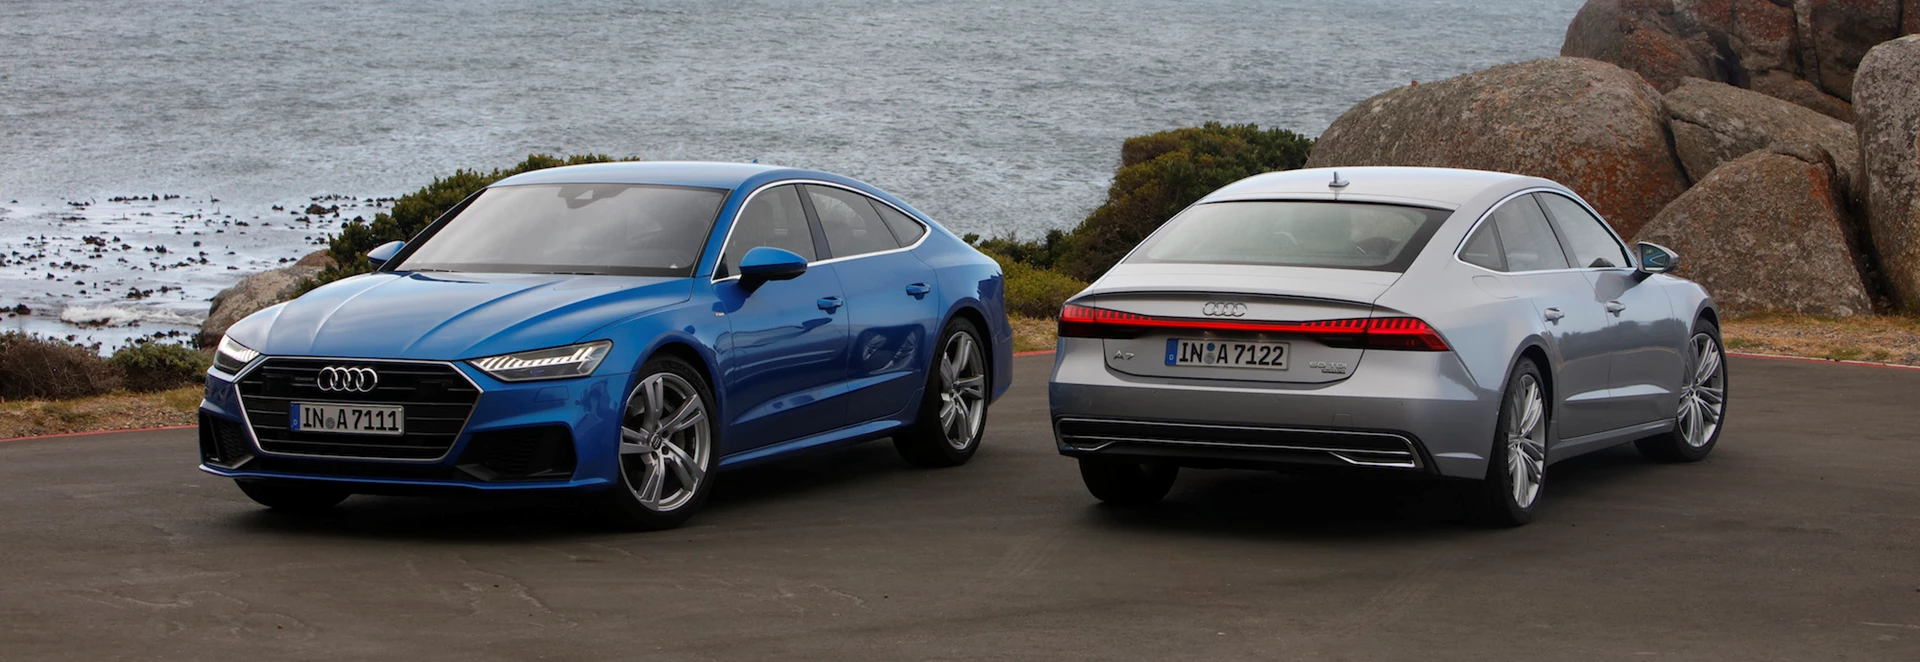 Top facts you didn’t know about the Audi A7